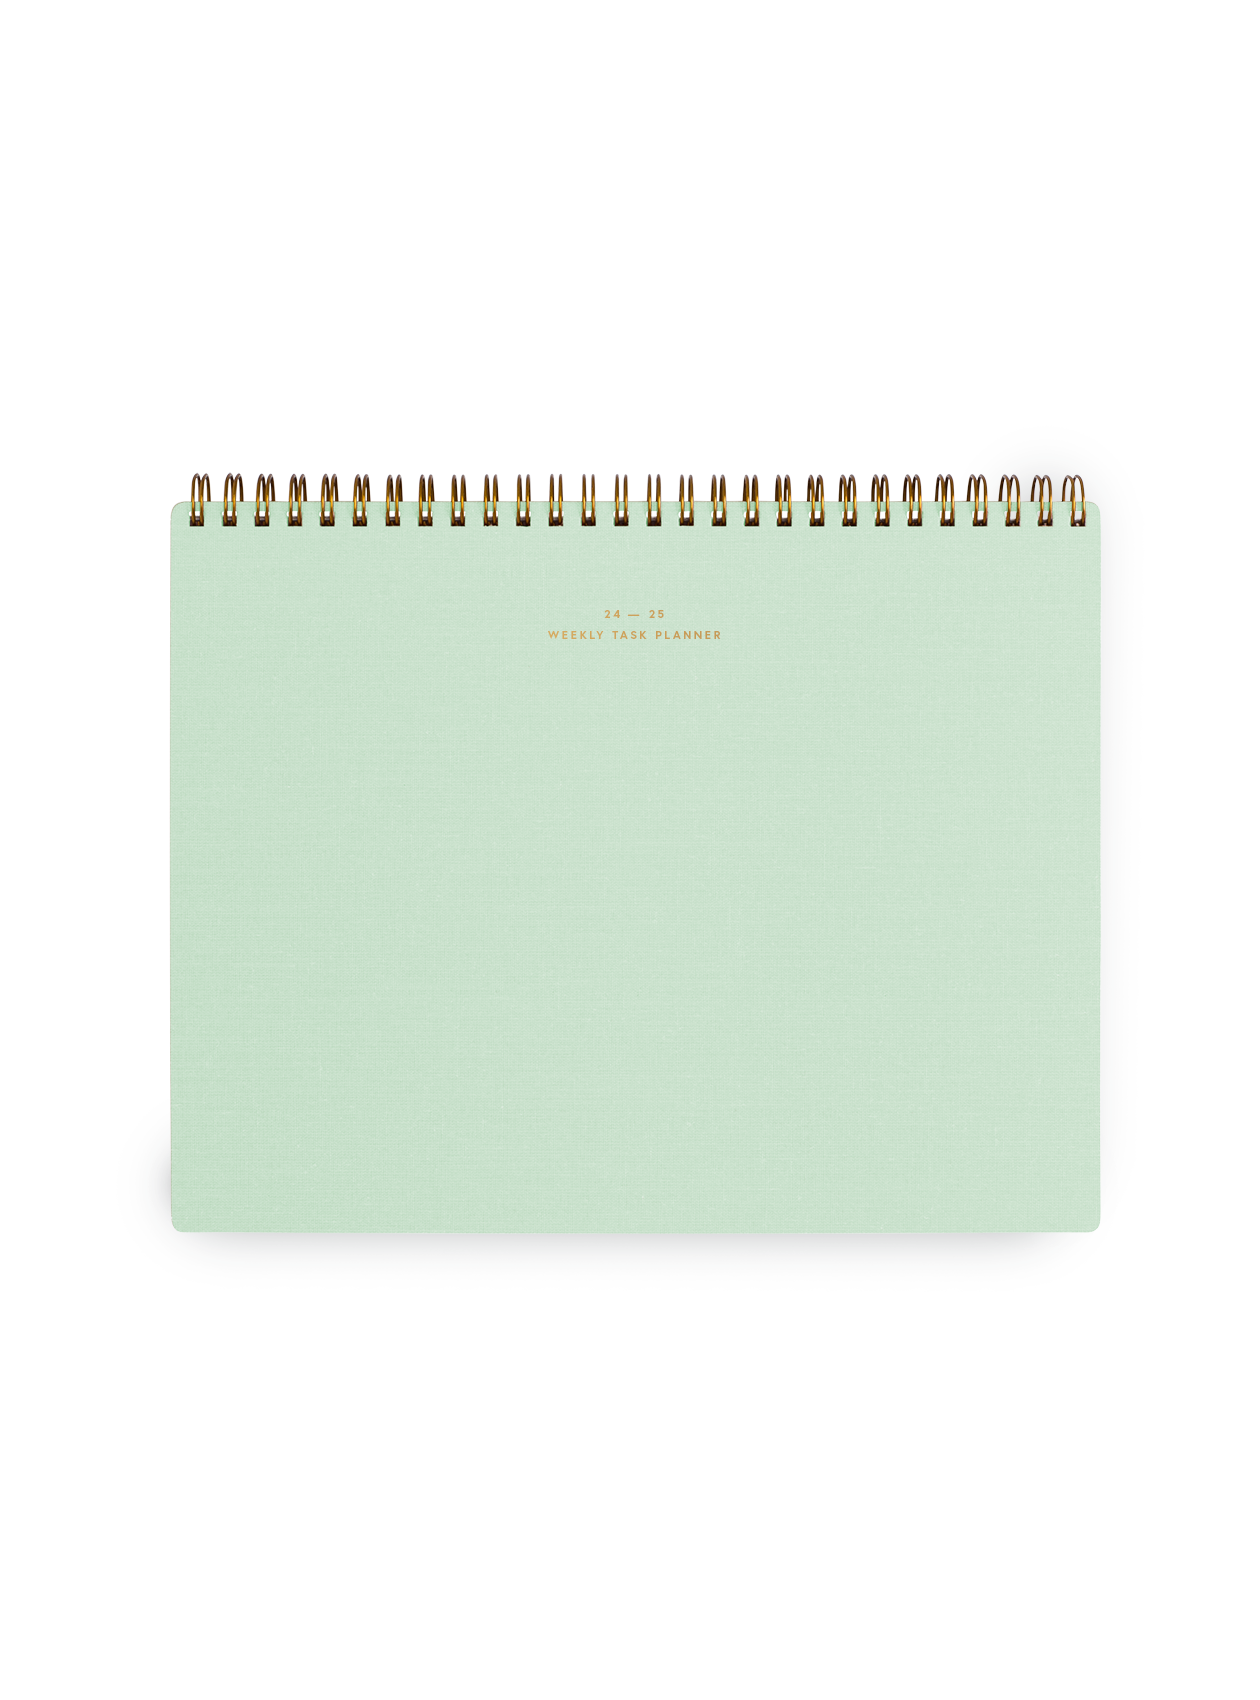 Appointed top-bound 24-25 Weekly Task Planner with brass wire-o binding and gold foil details || Mineral Green